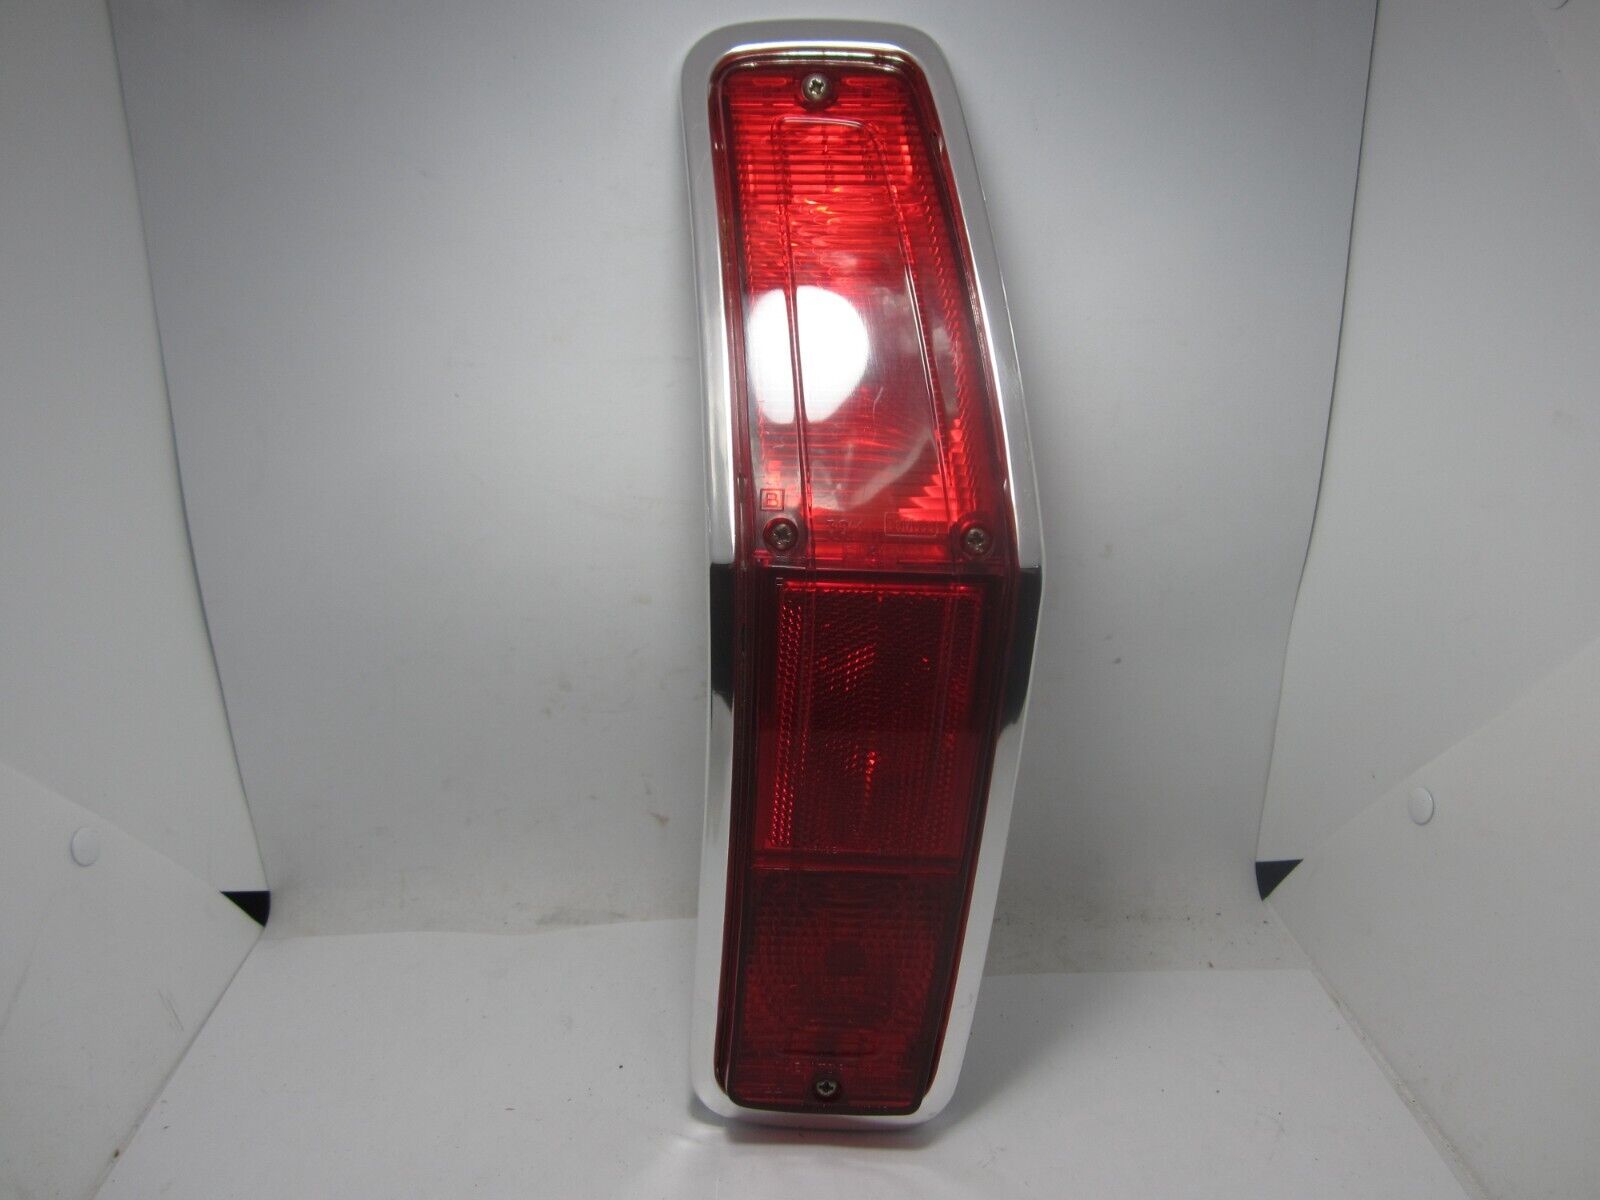 66-70 Ford Cortina MKII Estate Wagon Export Market RH Tail Light Assembly NOS